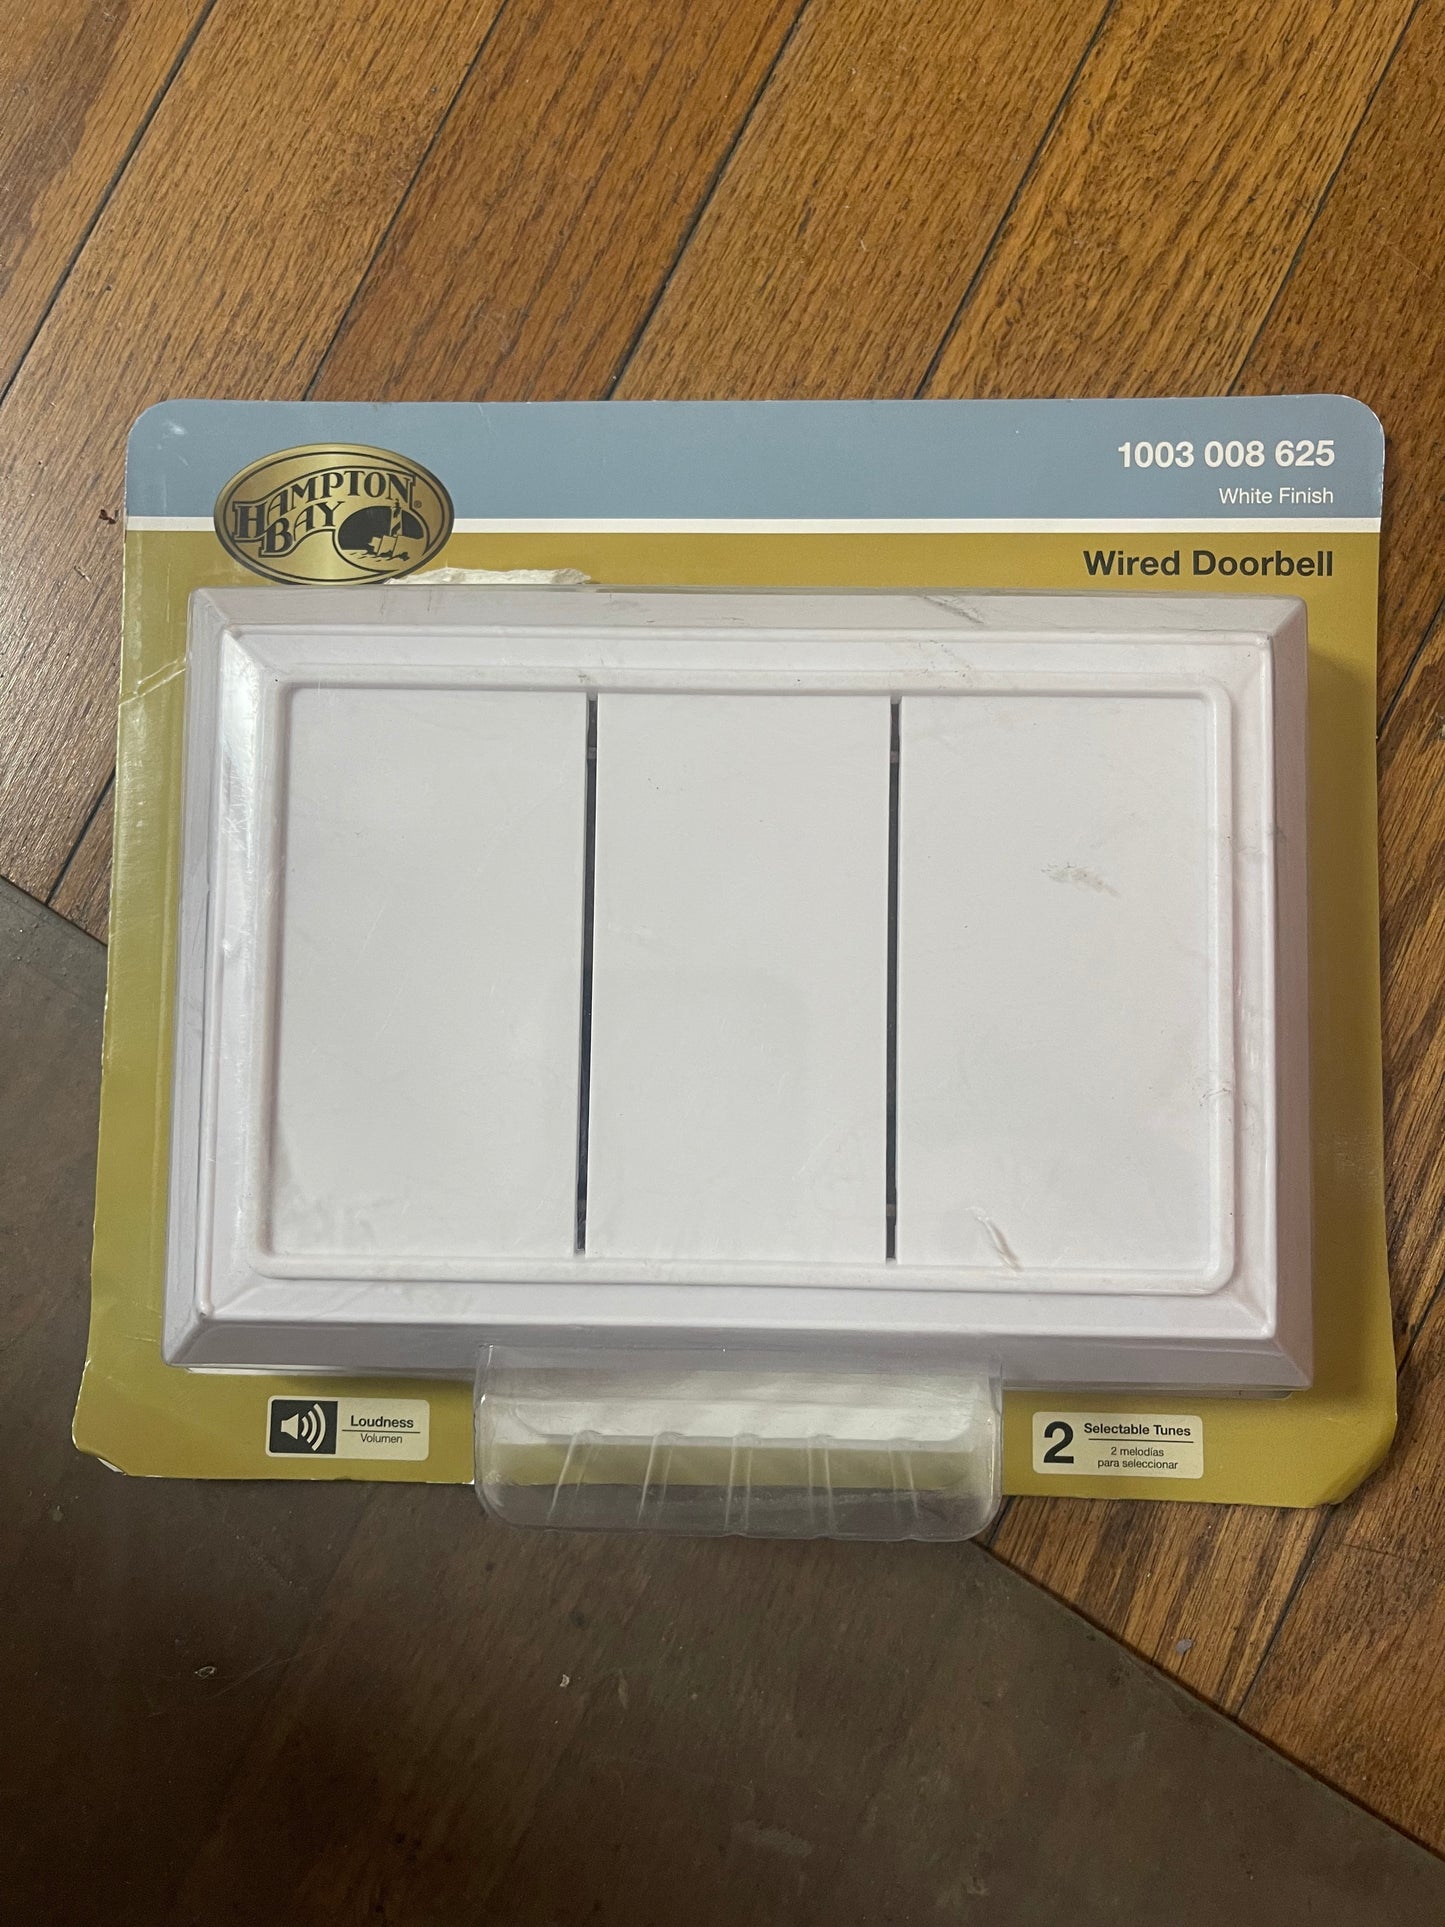 Hampton Bay Wired Door Chime in White Damaged Packaging